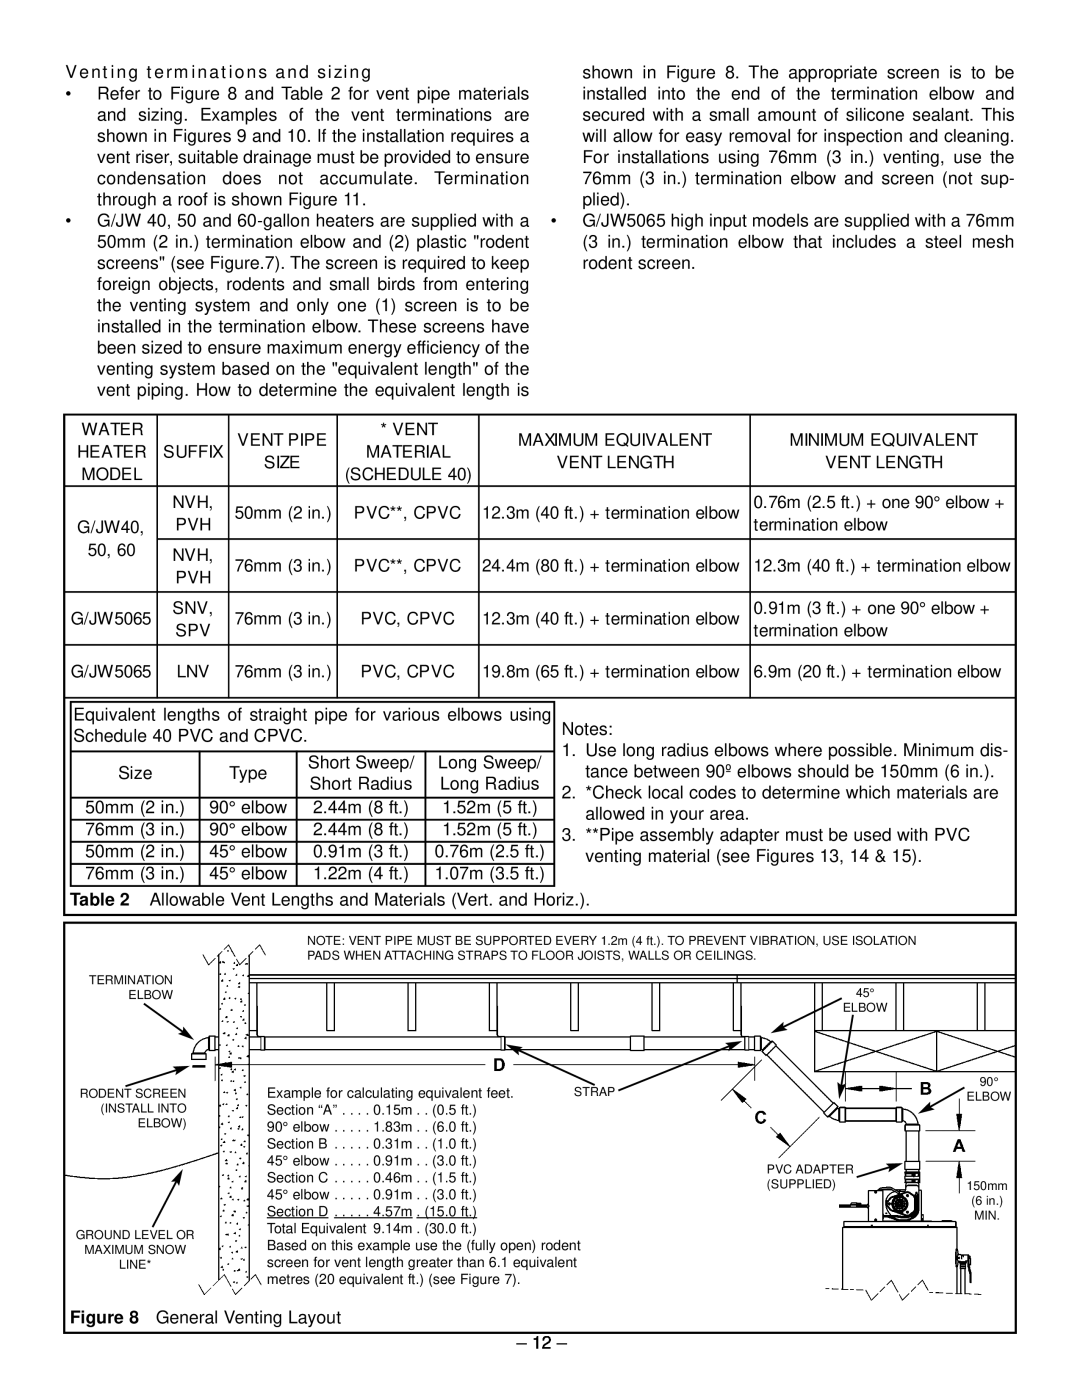 GSW 319594-000 manual Venting terminations and sizing 